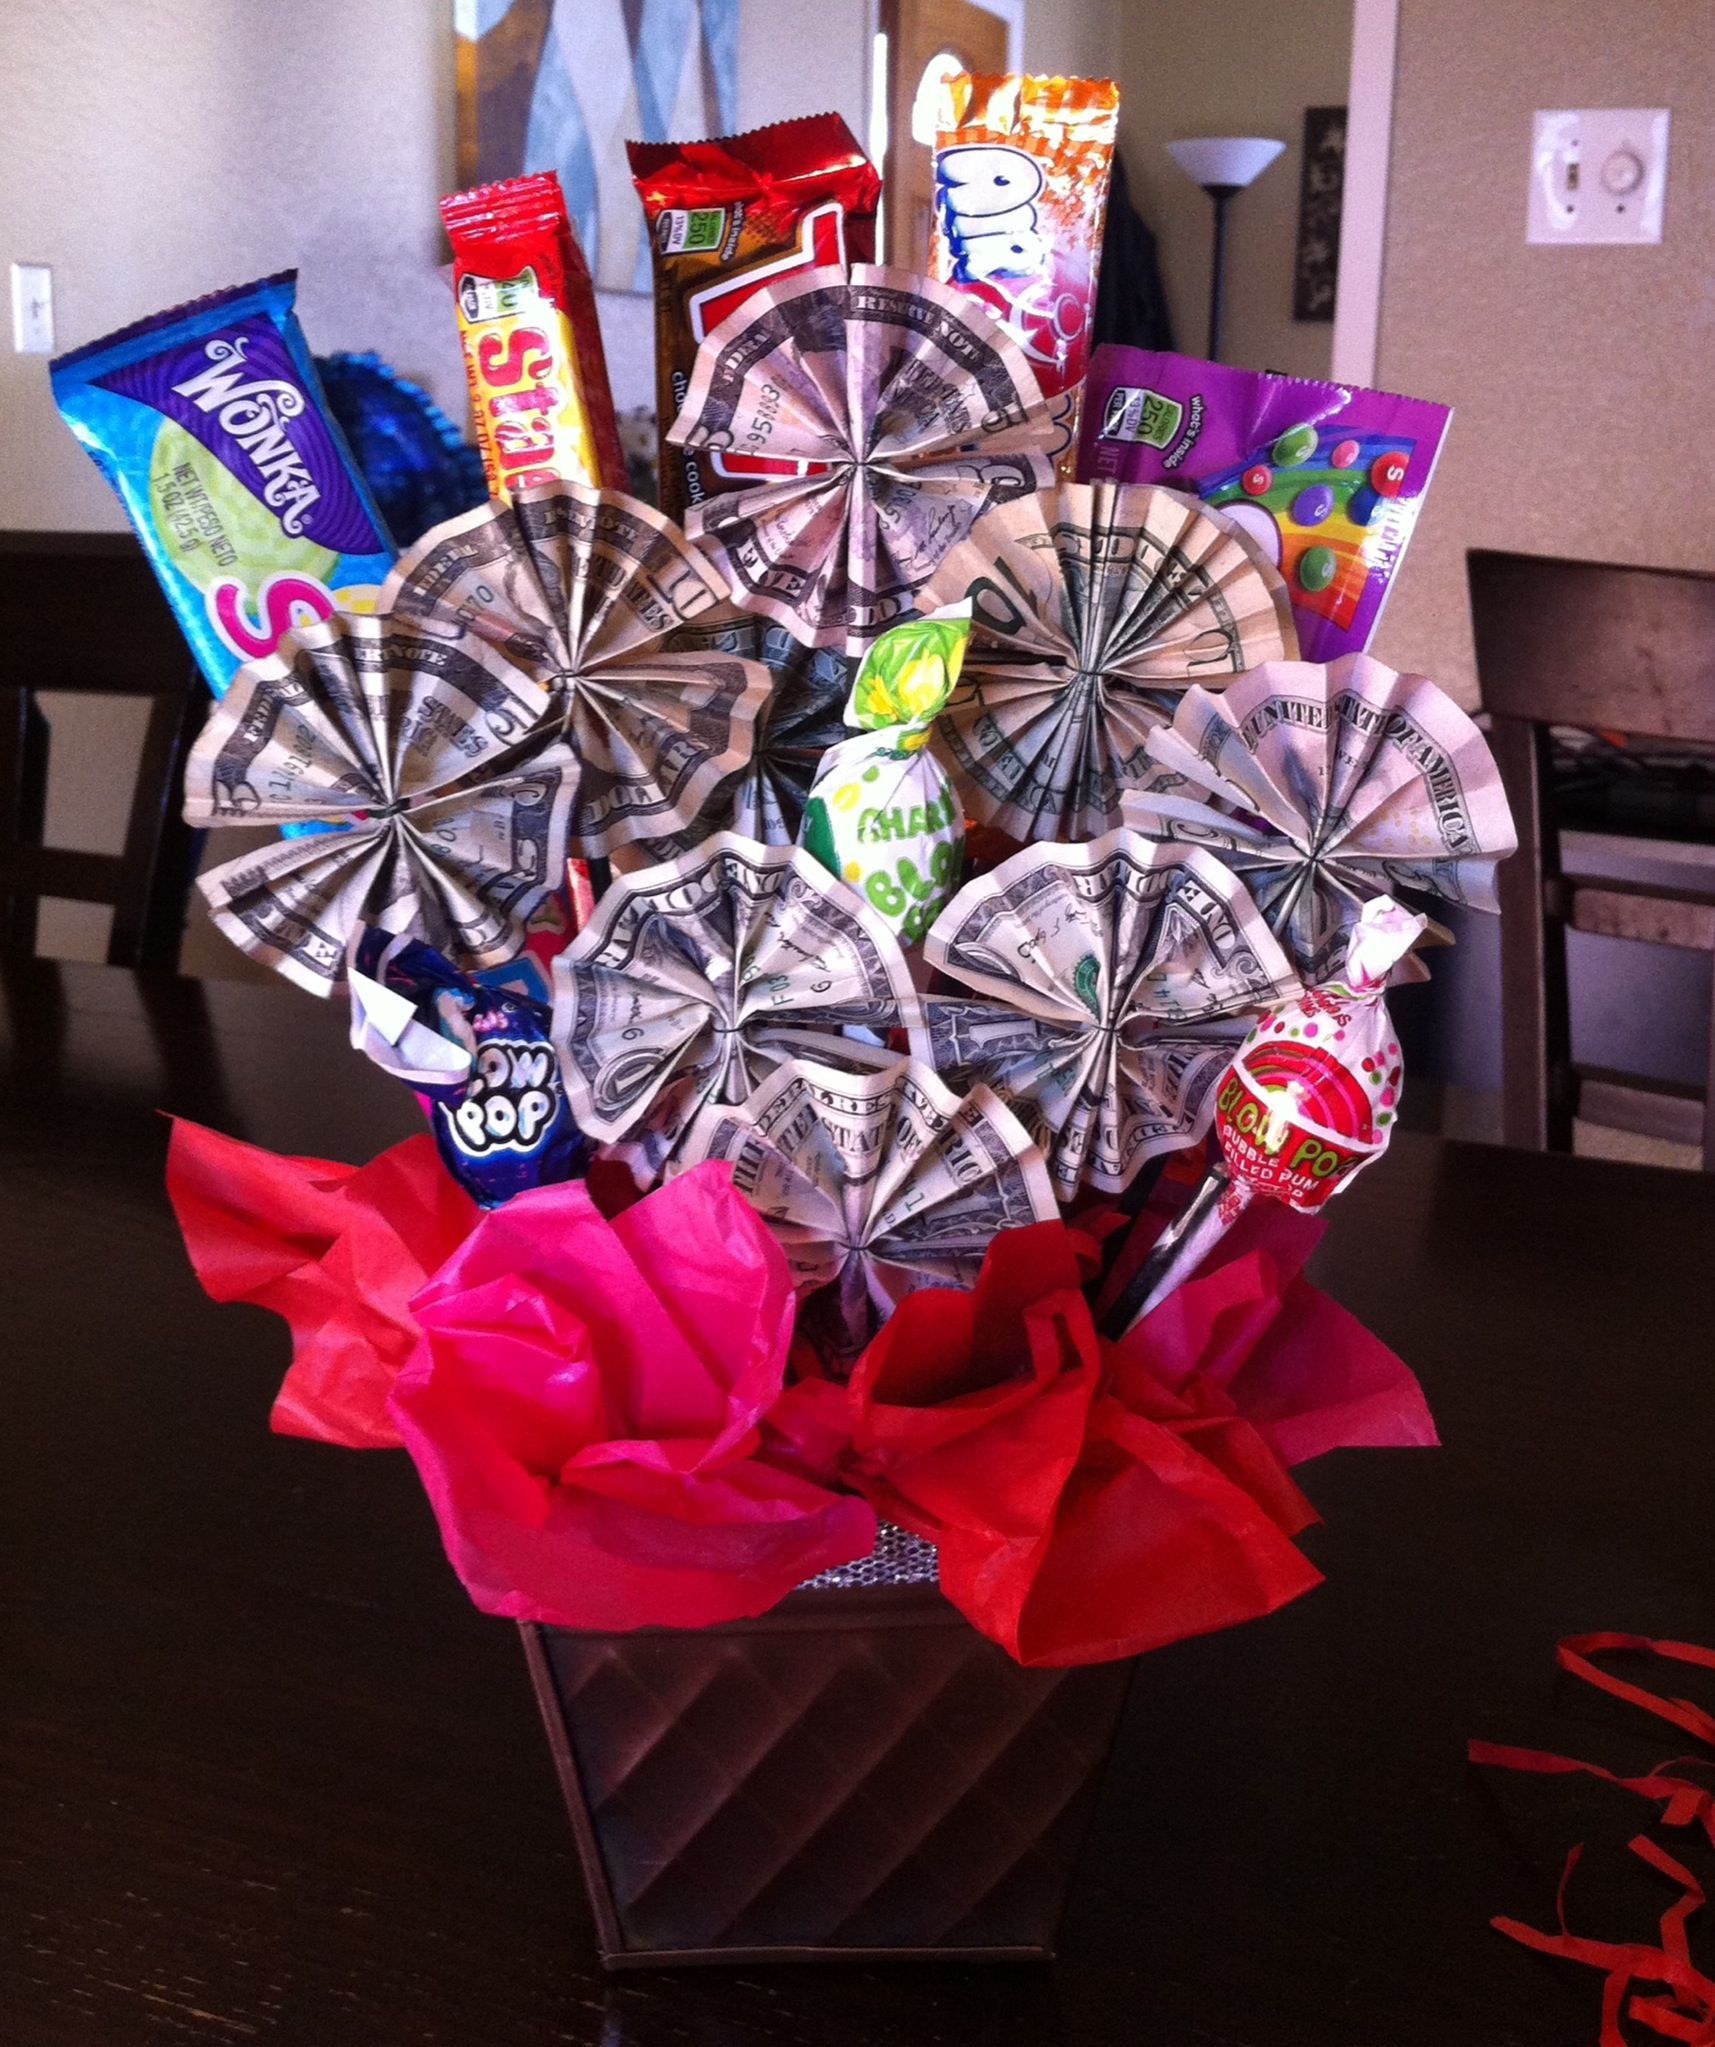 High School Graduation Gift Ideas For Niece
 Money candy bouquet I made this for my niece as a t